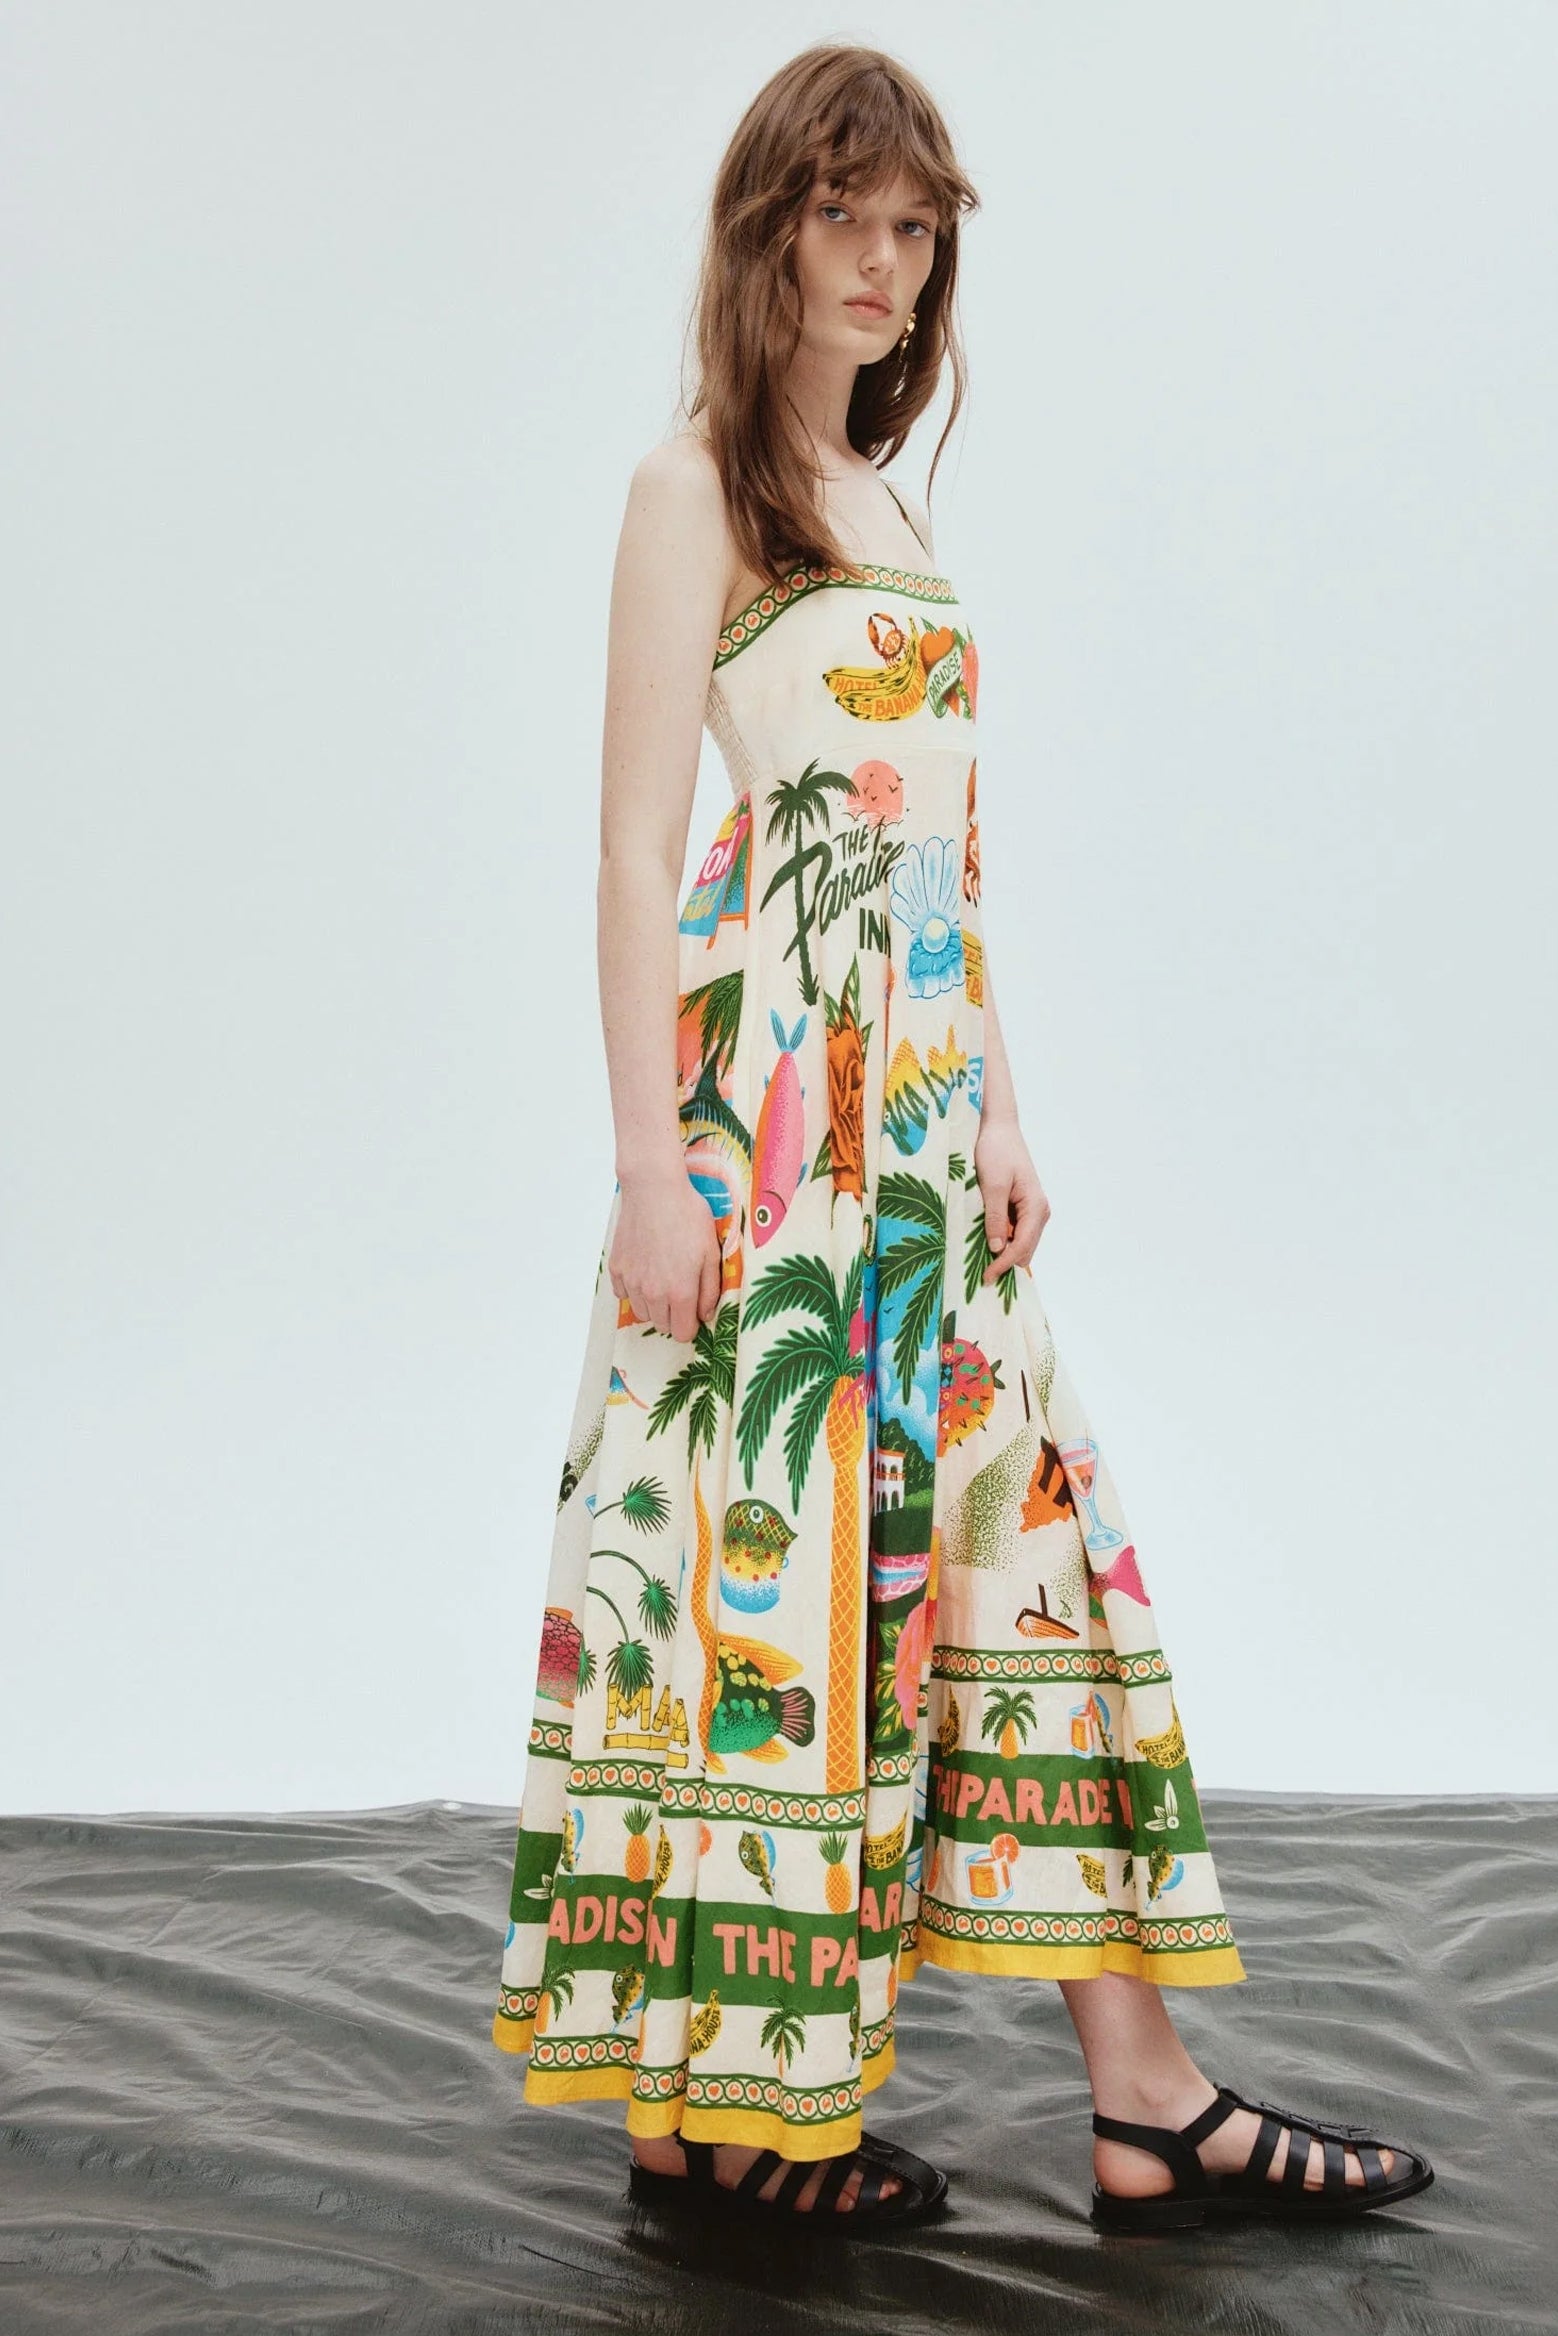 Alemais Paradiso Sundress in Multi available at The New Trend Australia.